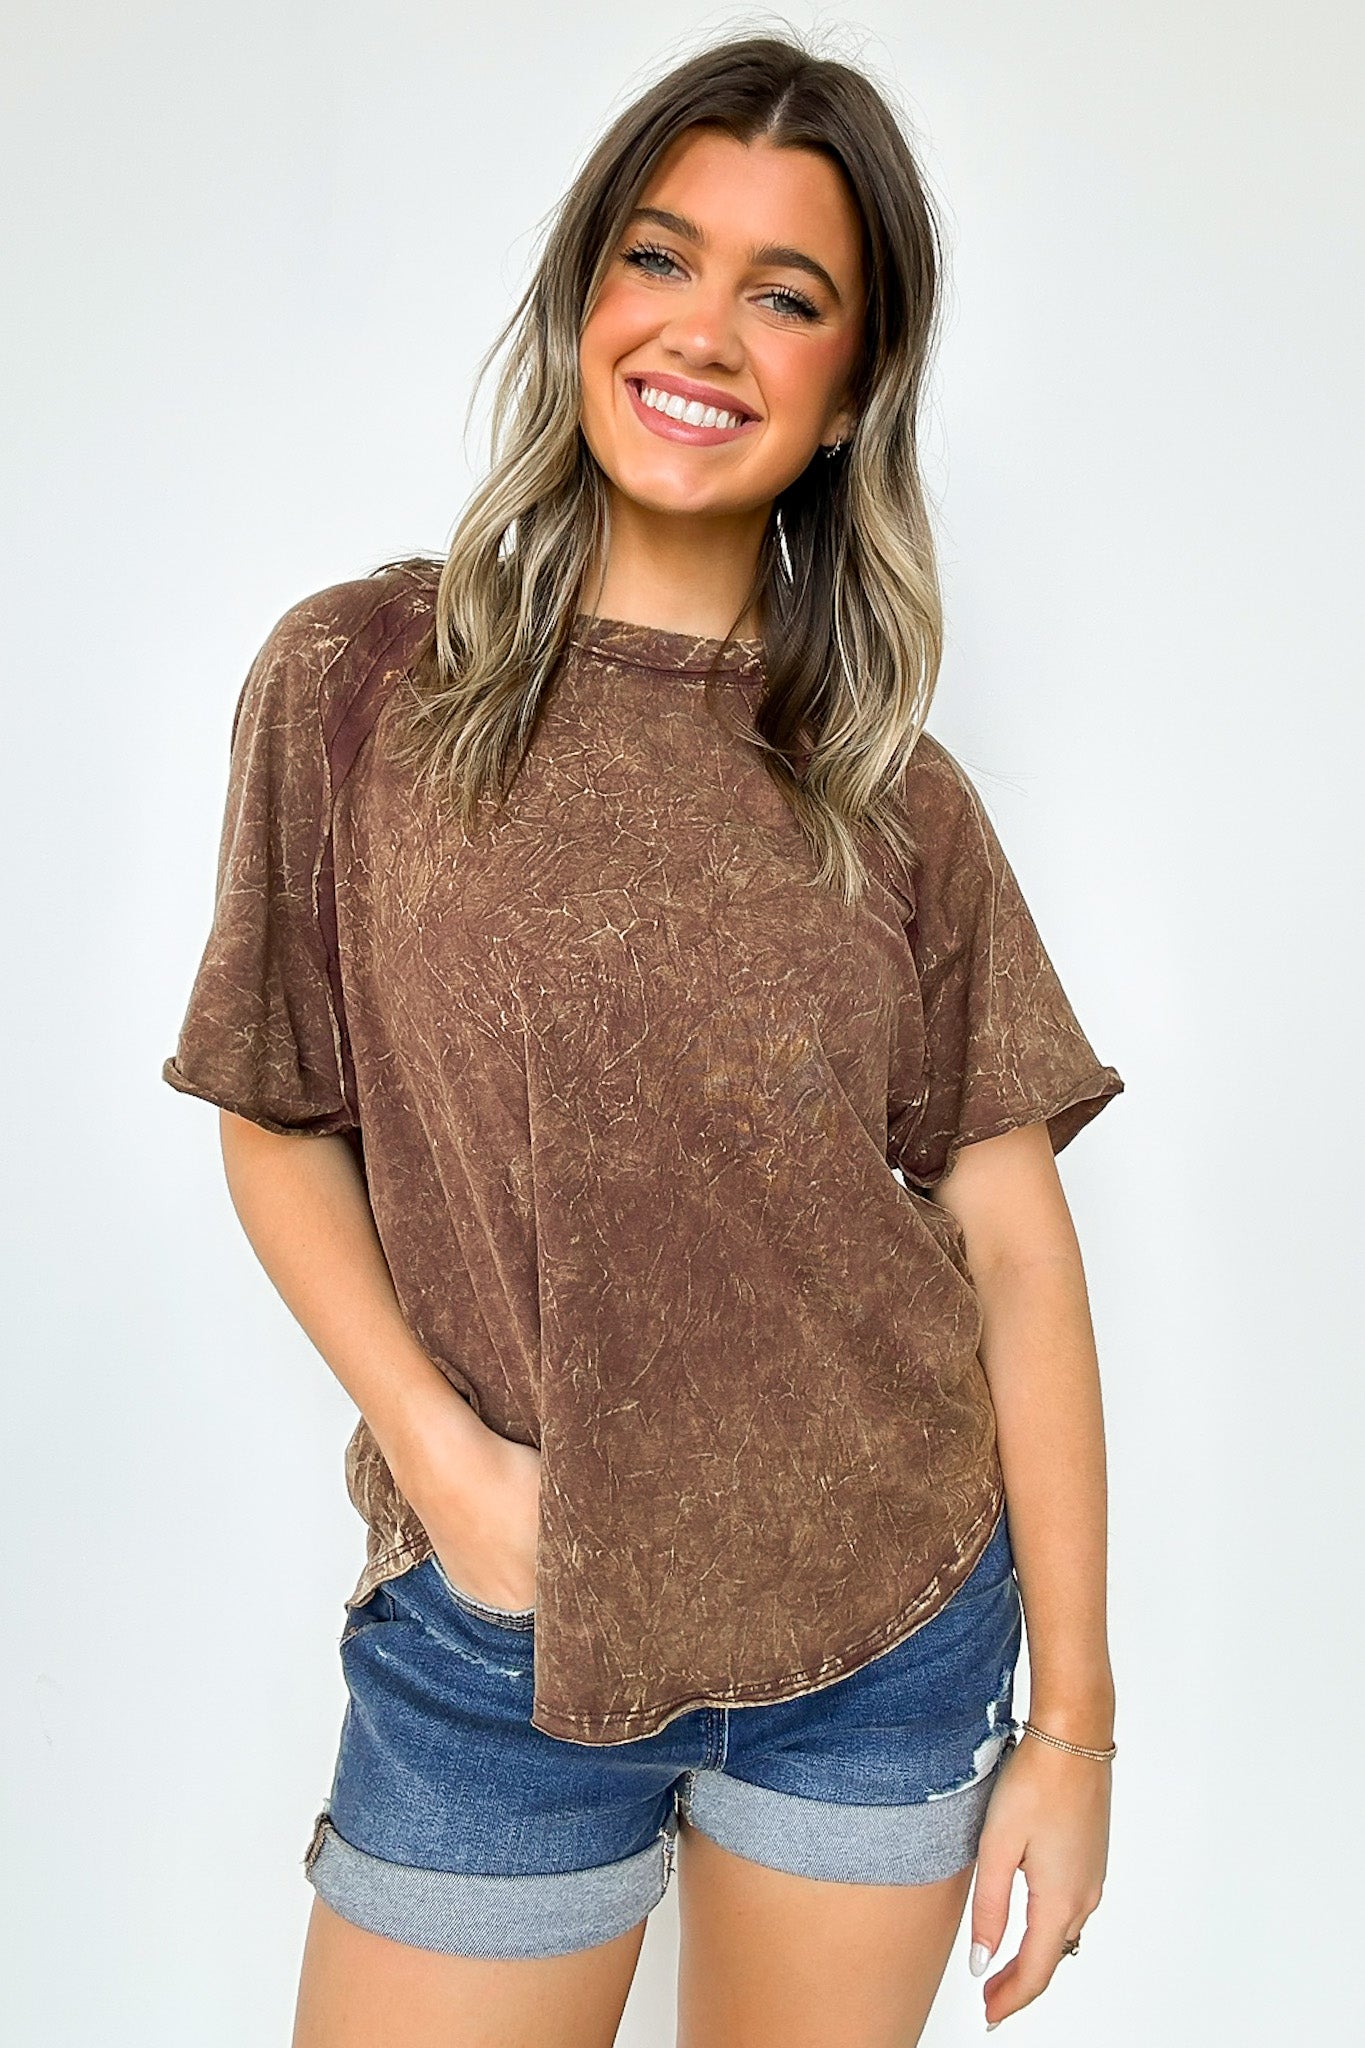  Carowyn Mineral Wash Relaxed Fit Top - Madison and Mallory